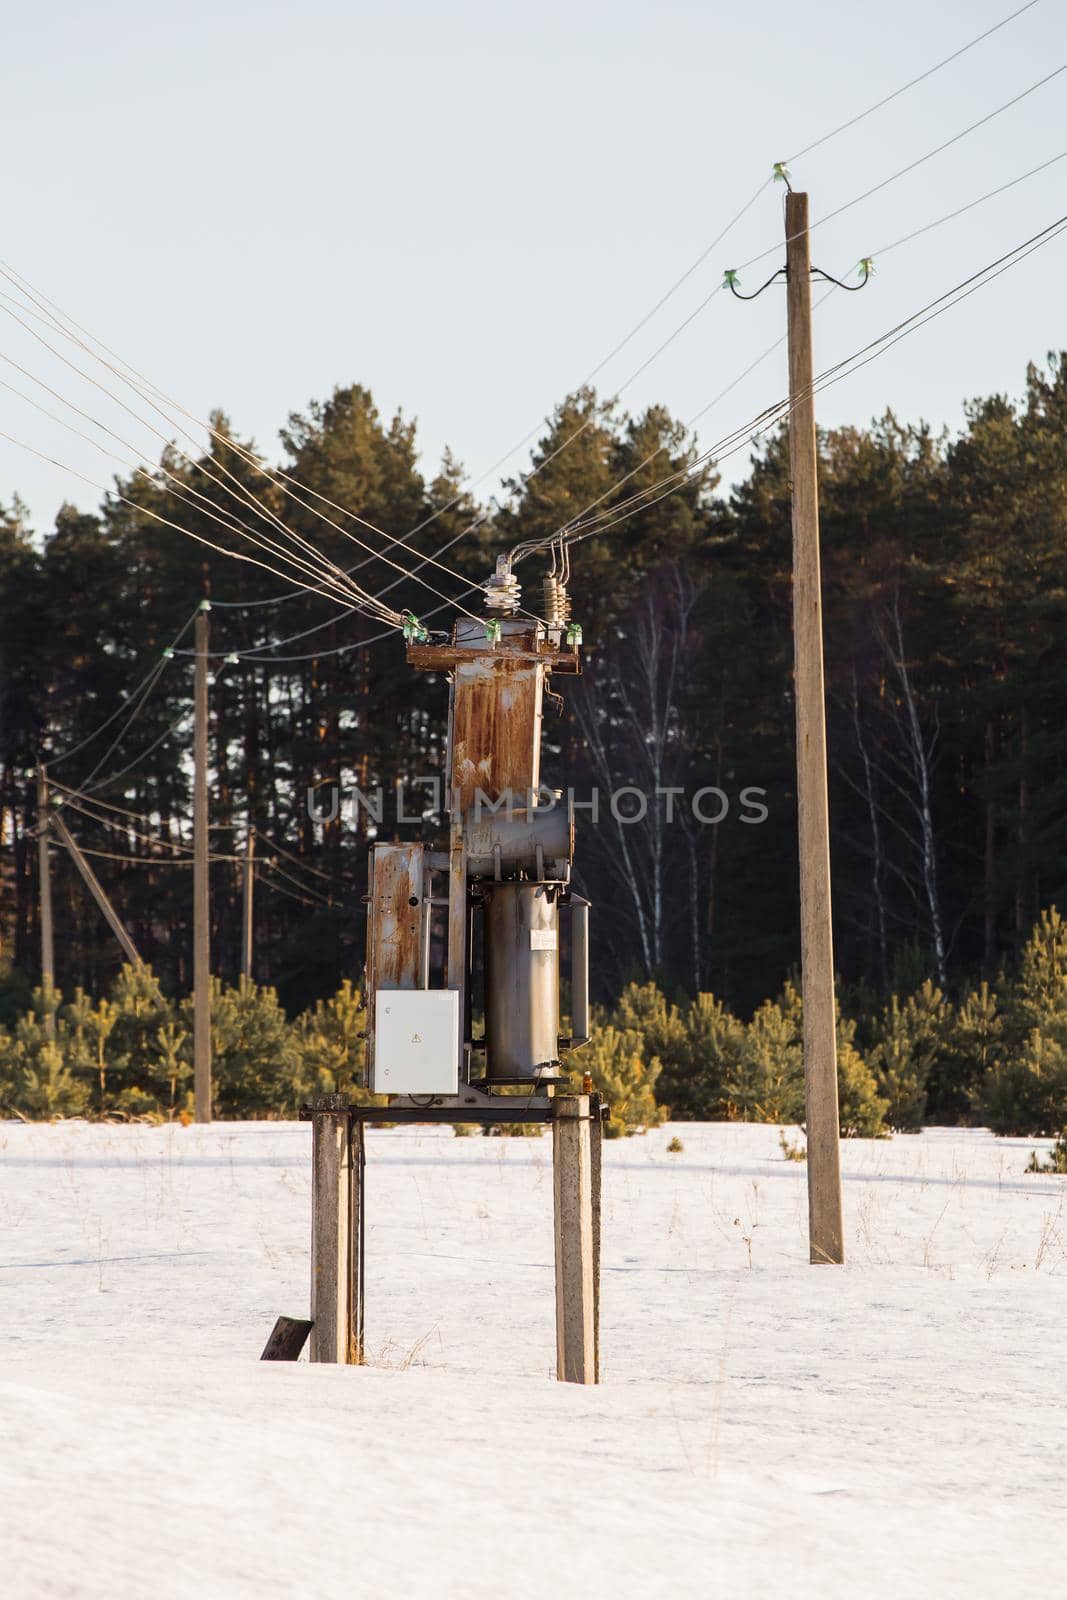 An impressive winter evening in nature, a transformer box in the field. The concept of power grids in the countryside. In the background there is a forest in the evening sunlight.